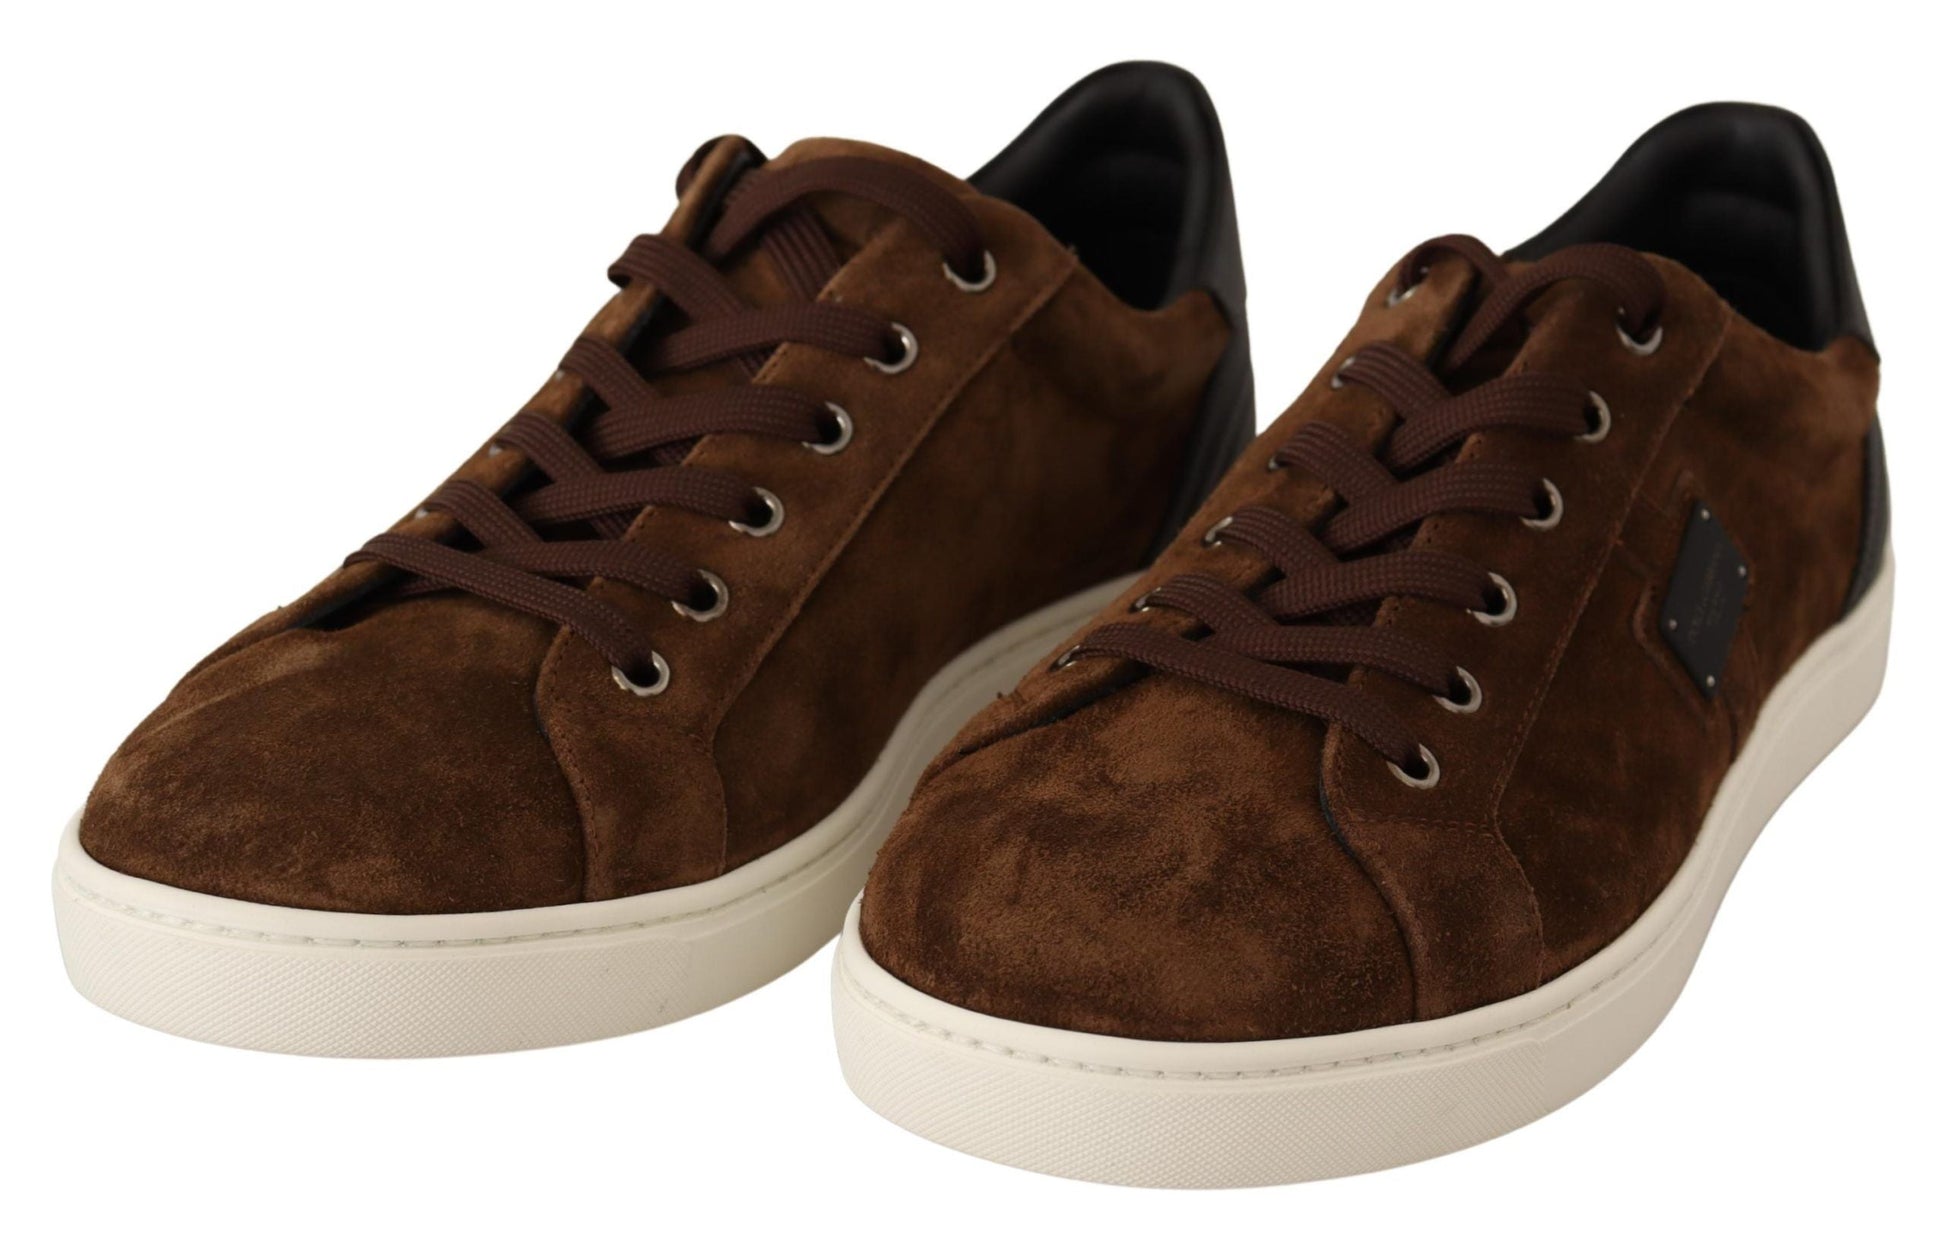 Dolce & Gabbana Brown Suede Leather Men Sneakers | Fashionsarah.com